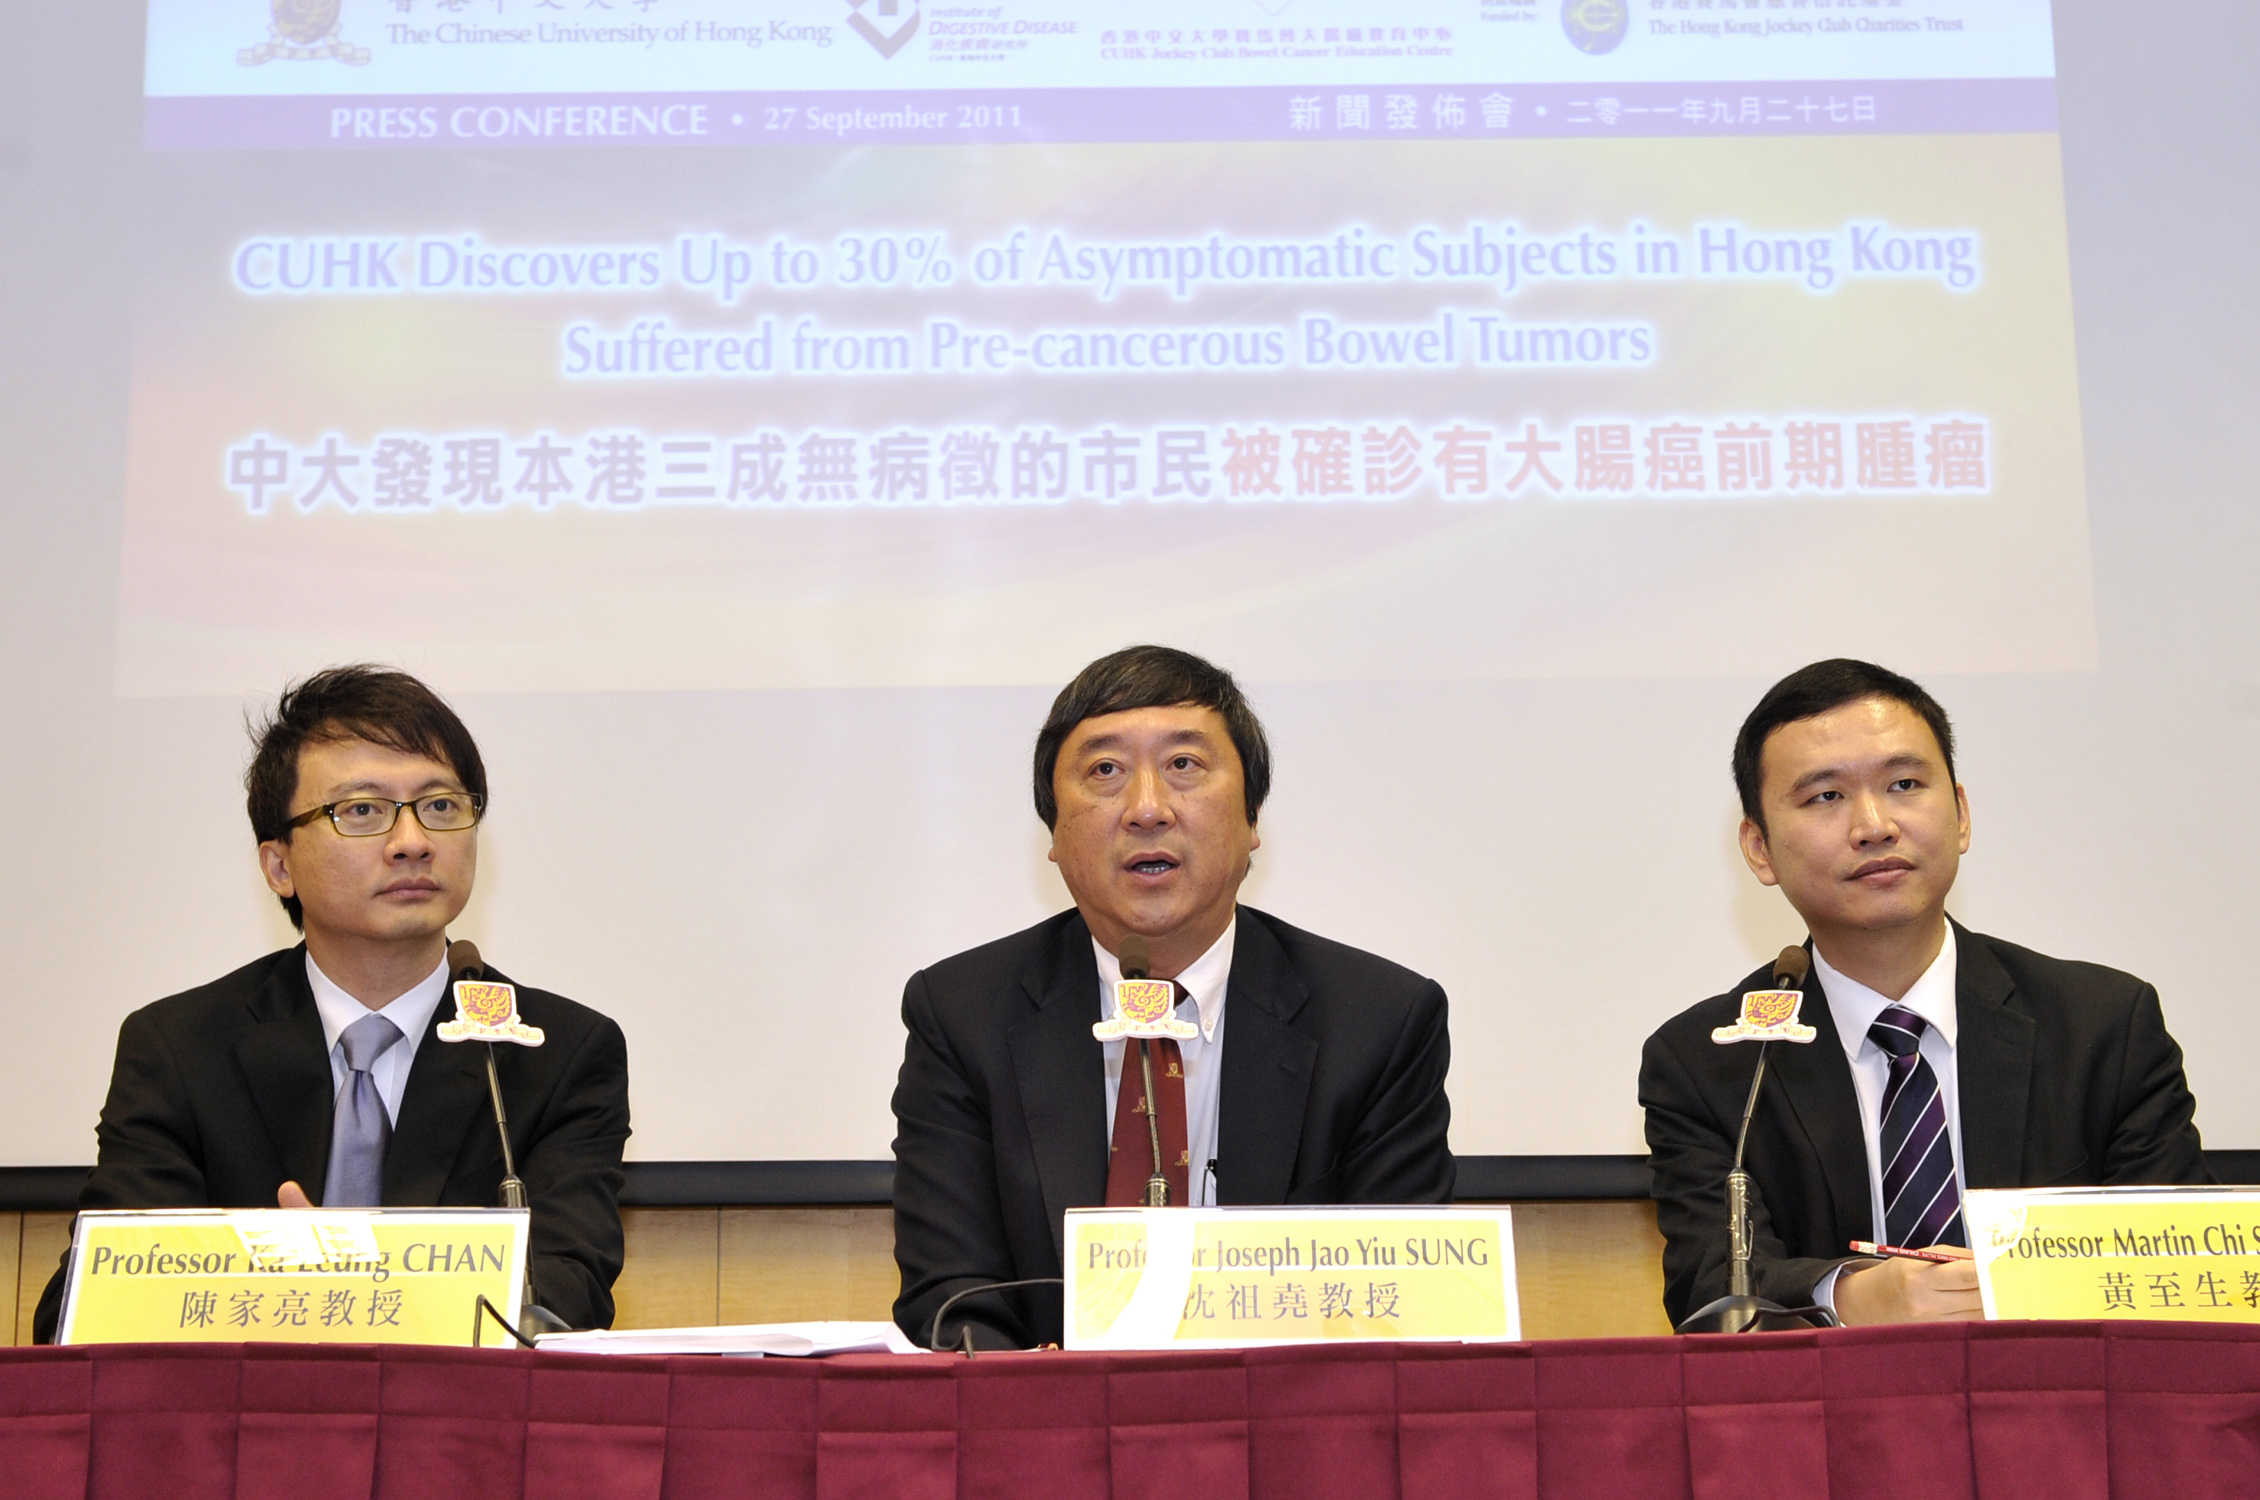 (From left) Prof. Francis Ka Leung CHAN, Honorary Director, CUHK Jockey Club Bowel Cancer Education Centre; Prof. Joseph Jao Yiu SUNG, Founding Director and Consultant; and Prof. Martin Chi Sang WONG, Director of the Centre